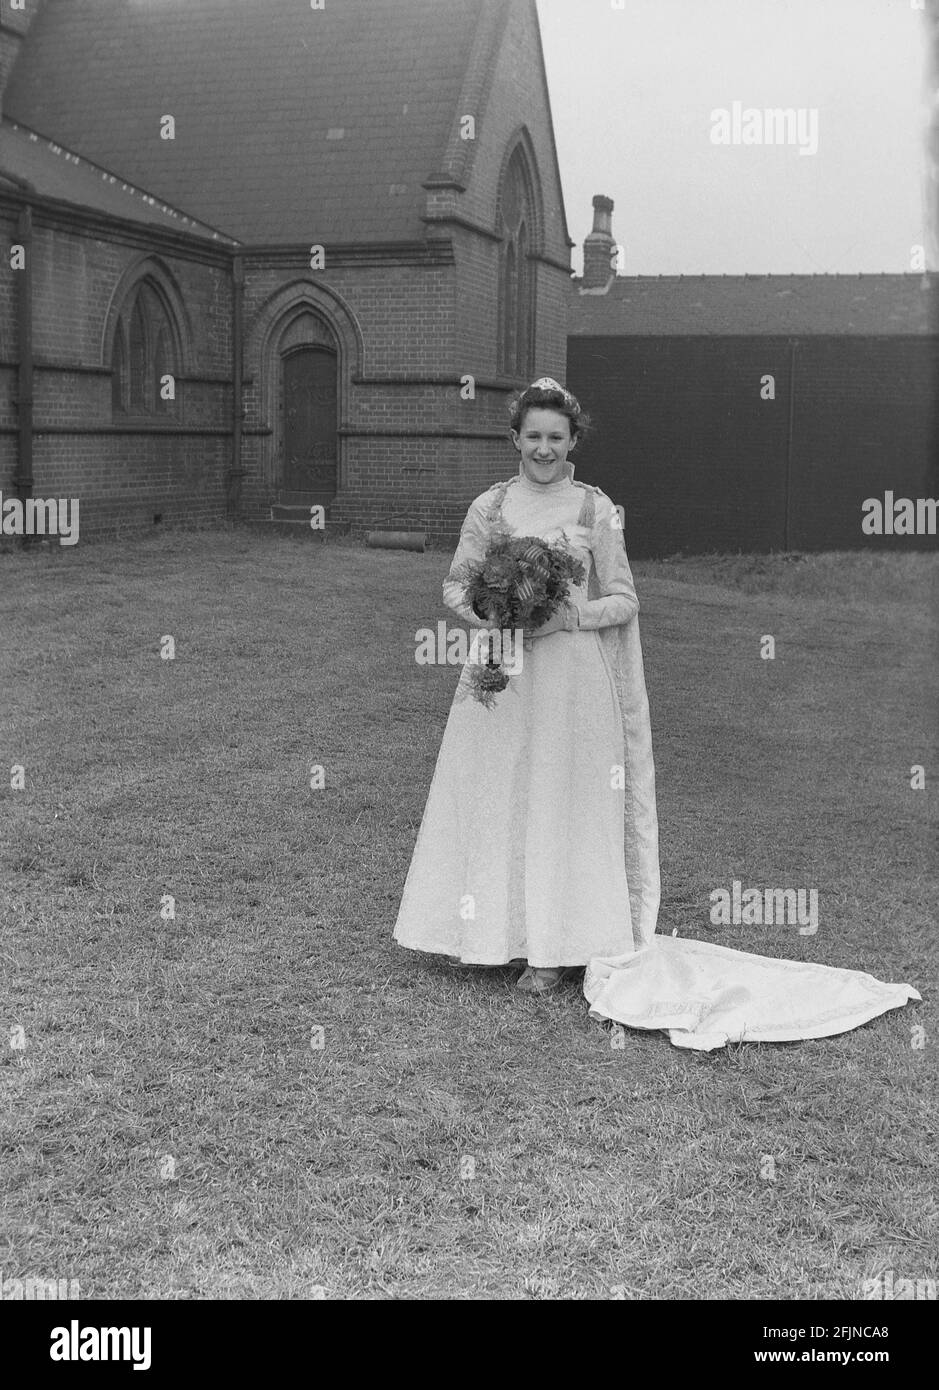 1956, historical, outside in the grounds of church, a young girl in her gown and holding a flower bouquet stnading for a photograph before the May Day carnival and the crowing of the town's May Queen. An ancient festival celebrating the arrival of Spring, May Day involved the crowning of a May Queen and dancing around a Maypole, activities that have taken place in England for centuries. Selected from the girls of the area, The May Queen would start the procession of floats and dancing. In the industrialised North of England, the Church Sunday Schools often led the organisation. Stock Photo